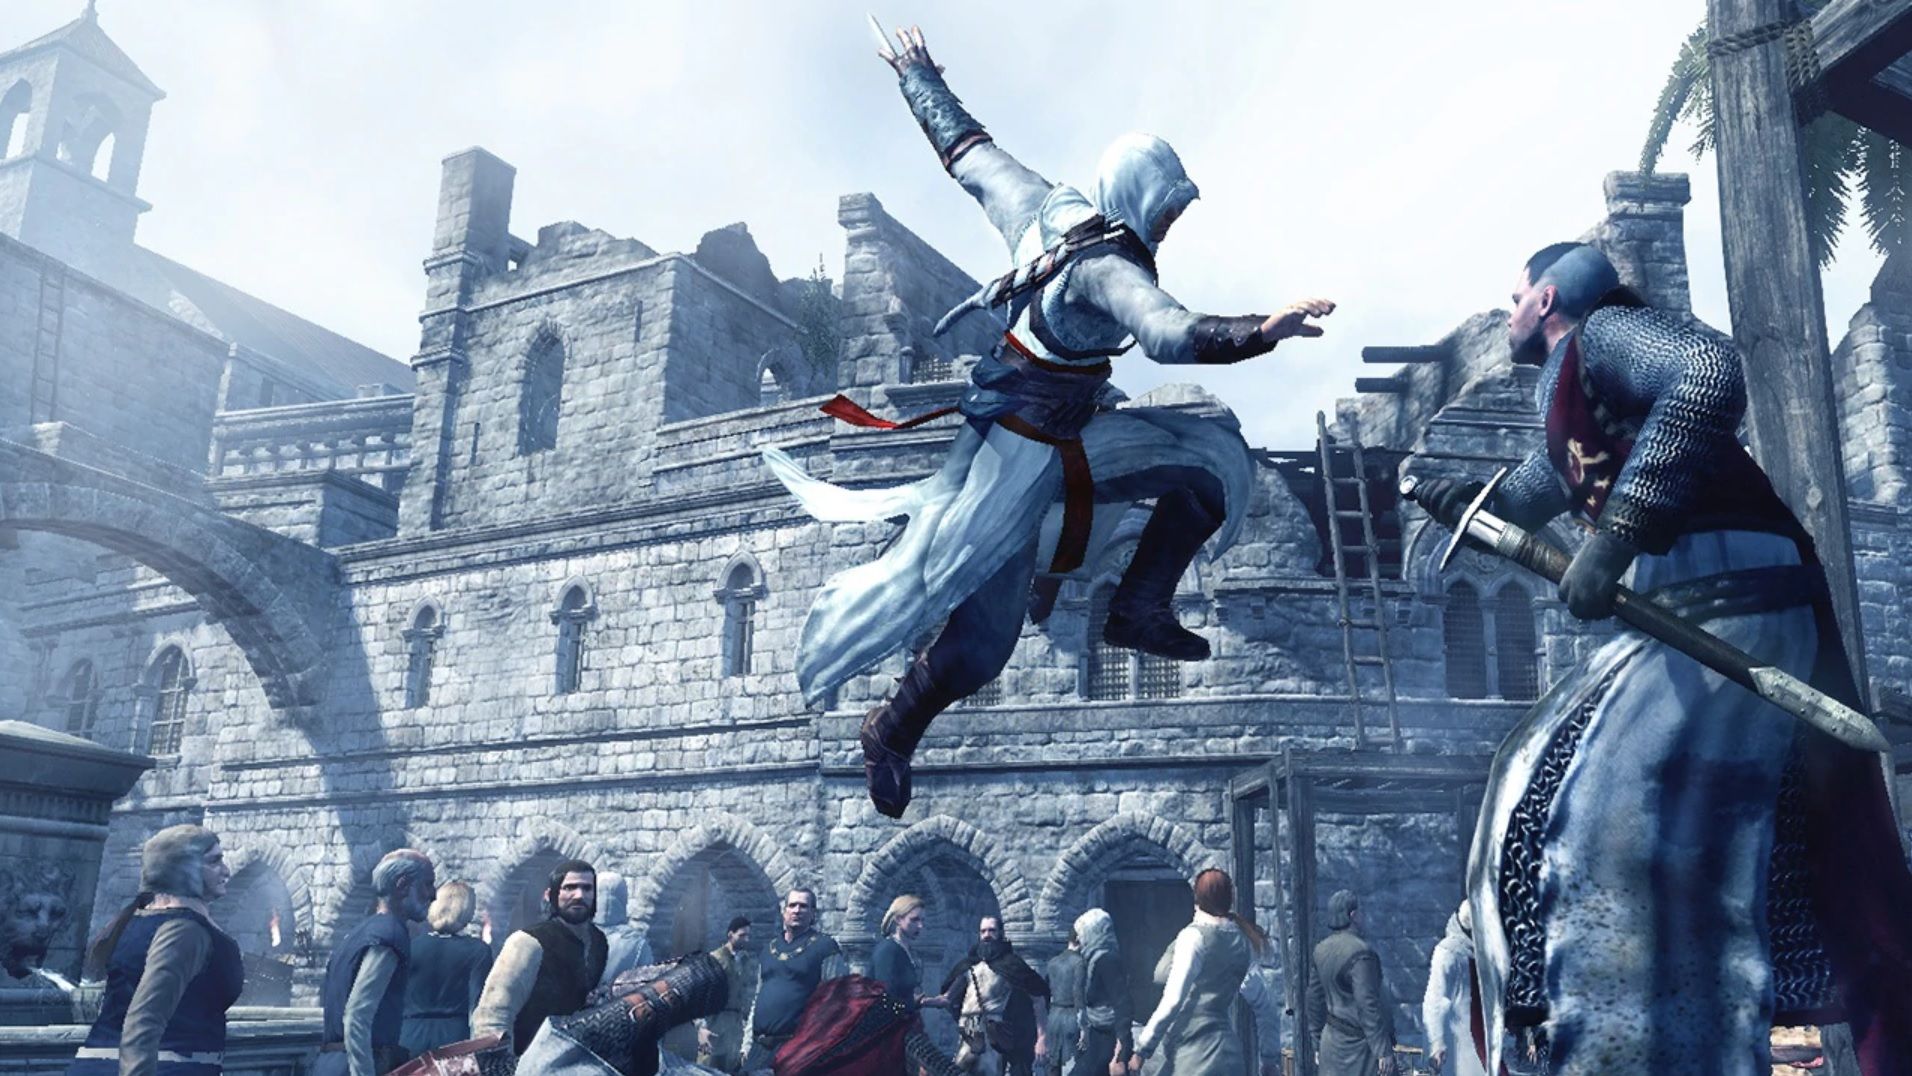 Assassins Creed Timeline All Major Events and Characters Explained